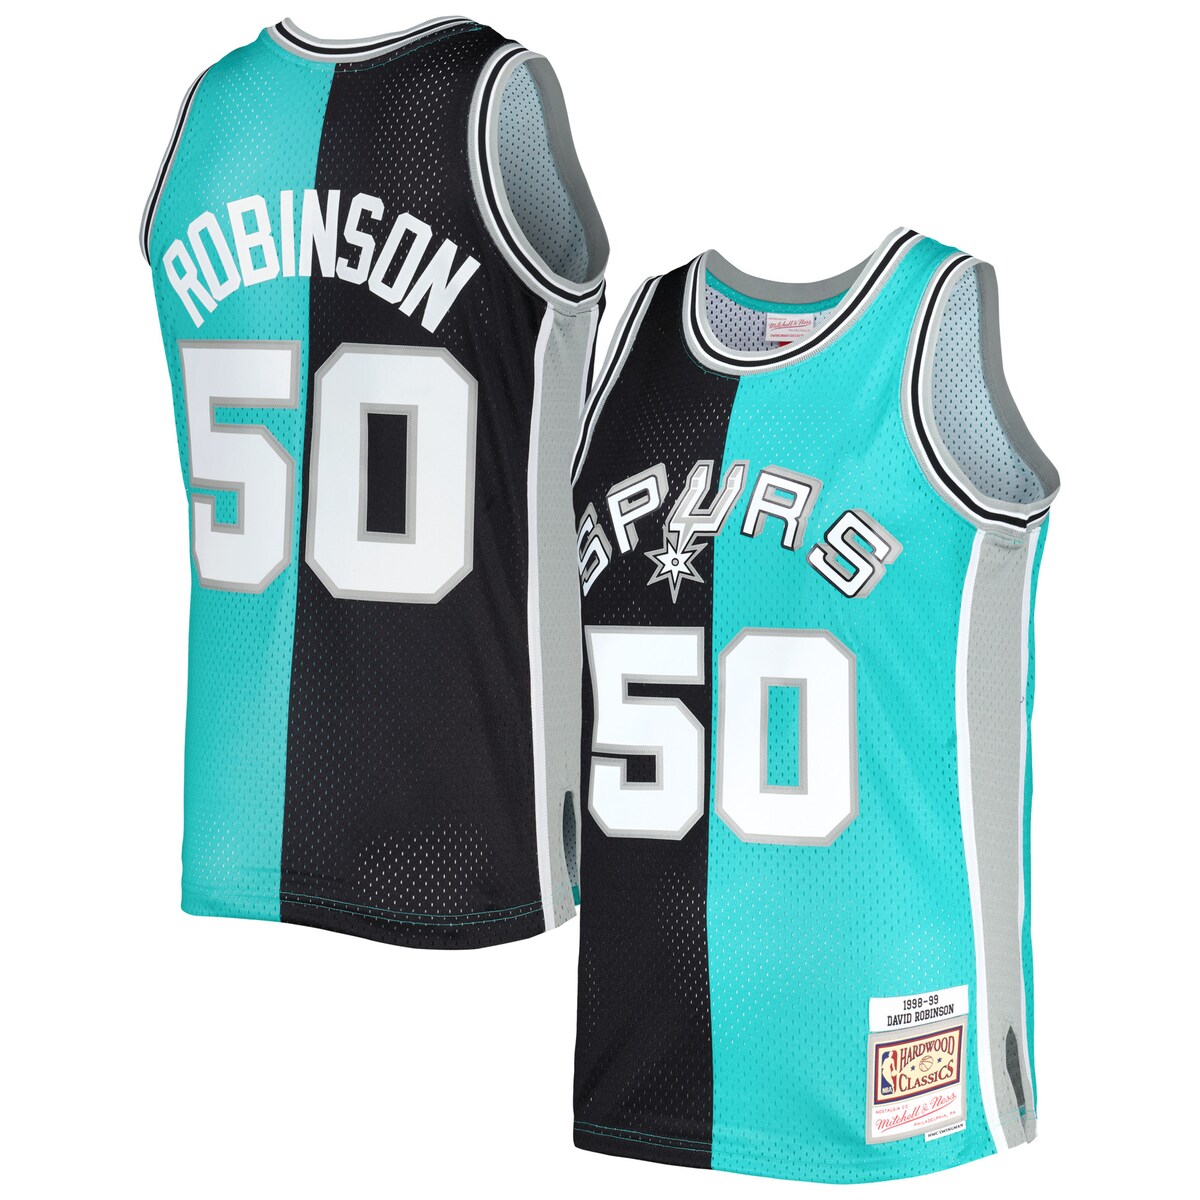 Showcase your timeless love for one of the San Antonio Spurs' greatest players of all time in a trendy, distinct way with this 1998/99 David Robinson Split Swingman jersey by Mitchell & Ness. This Hardwood Classics jersey features vibrant team and David Robinson graphics across a unique split design, allowing you to boast your spirit loud and proud. Additionally, the lightweight construction, sleeveless design and breezy mesh fabric bring comfort and breathability to your San Antonio Spurs fandom.Machine wash, line dryMesh fabricSwingman ThrowbackImportedOfficially licensedHeat-sealed fabric appliquesBrand: Mitchell & NessWoven jock tagSide splits at waist hemMaterial: 100% PolyesterSleeveless